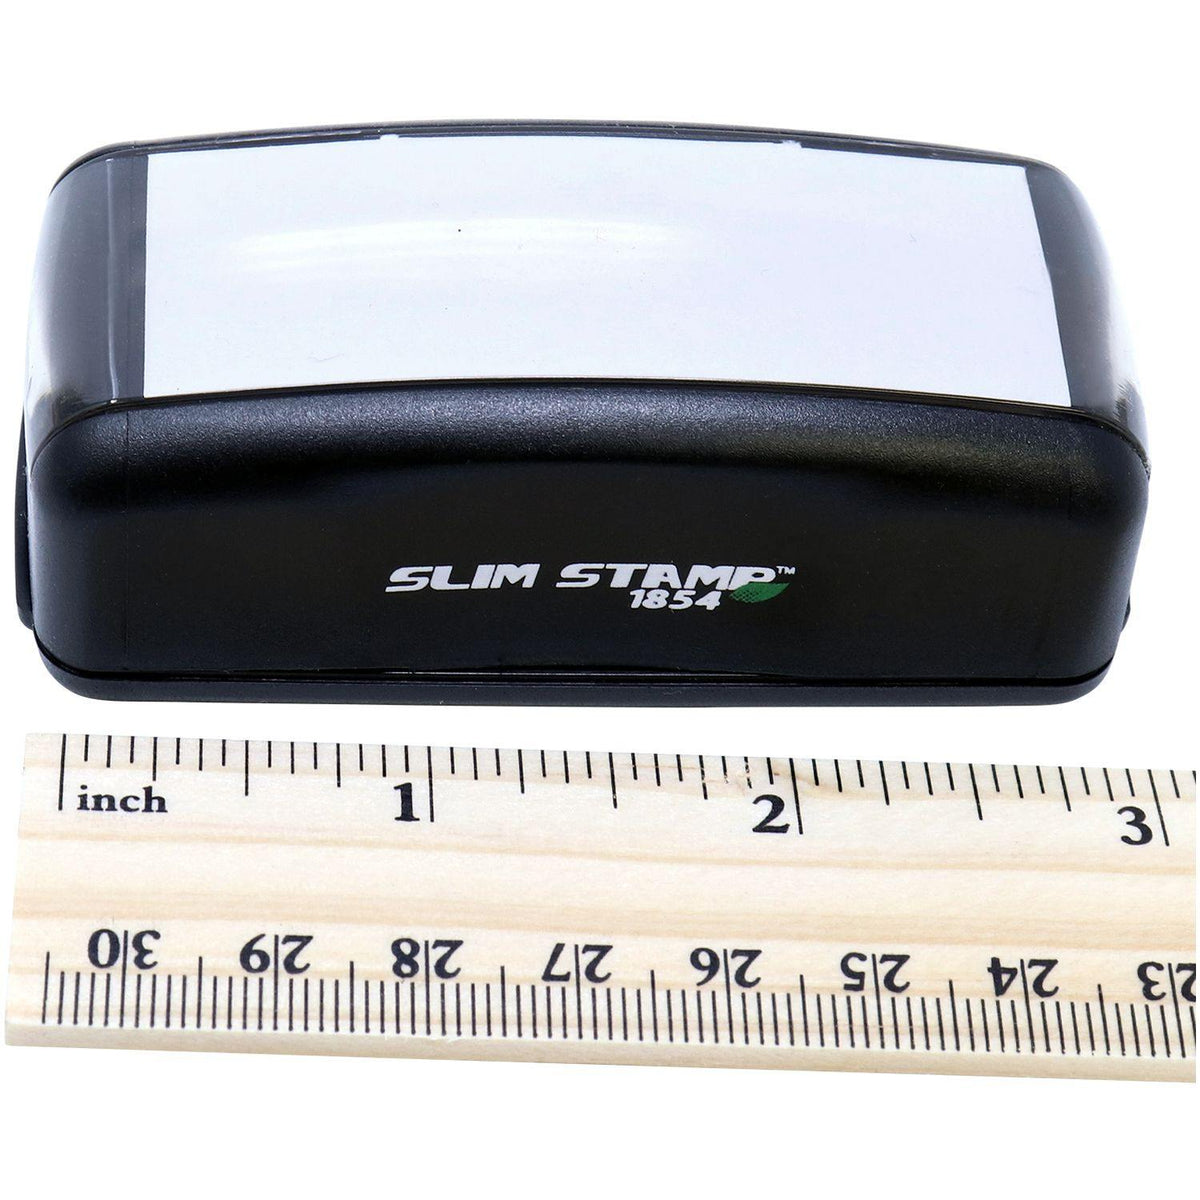 Measurement Large Pre-Inked Global Air Parcel Post Stamp with Ruler